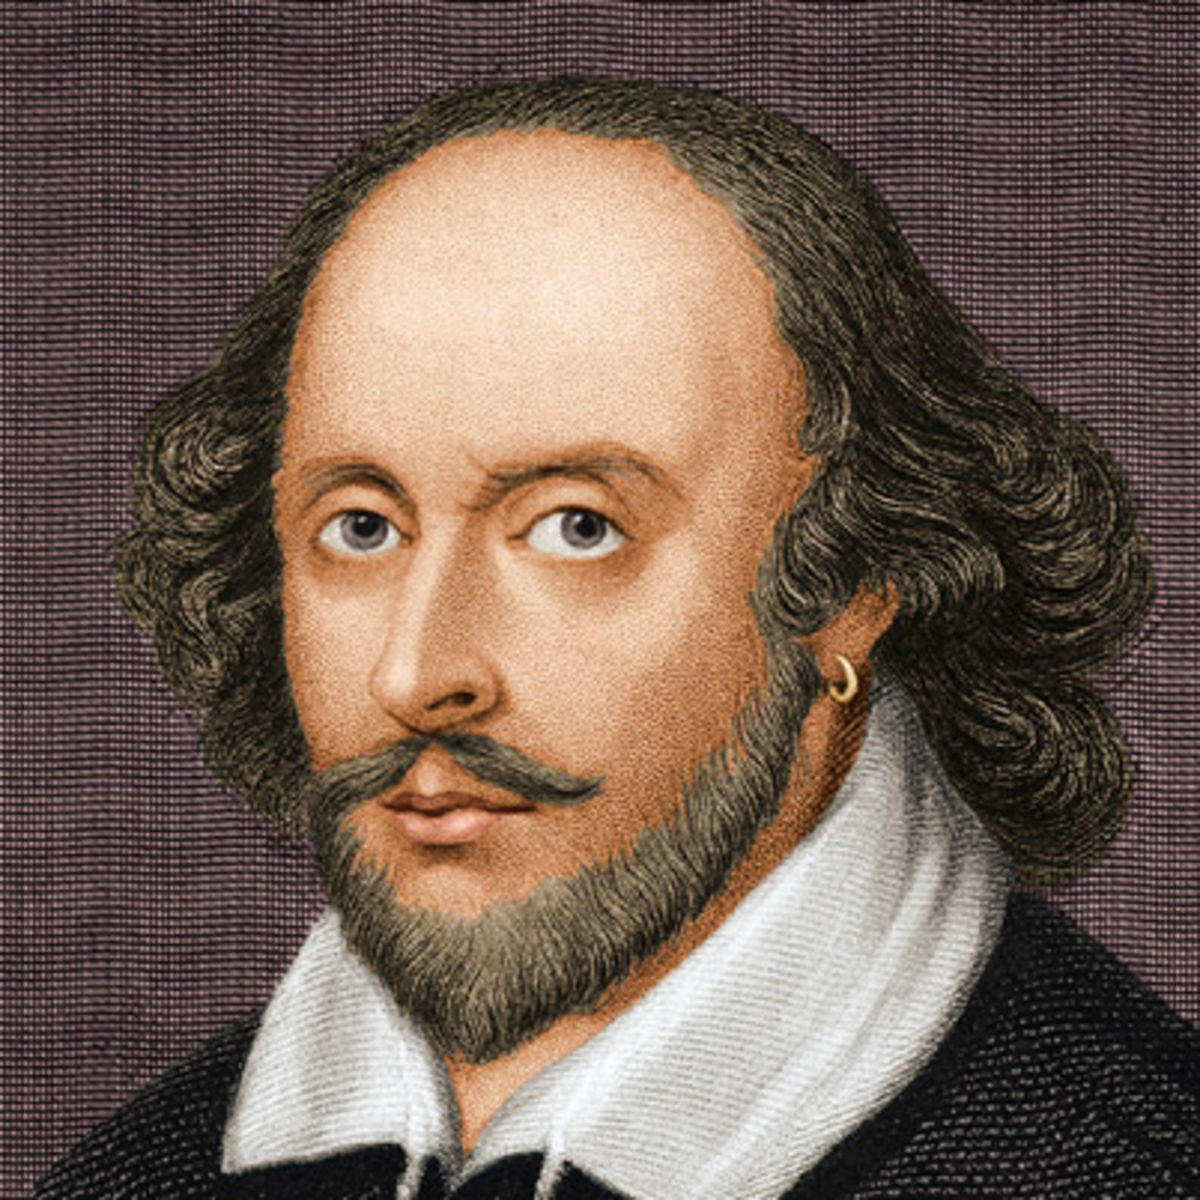 The "Your mother" can even be found in Shakespeare's works.